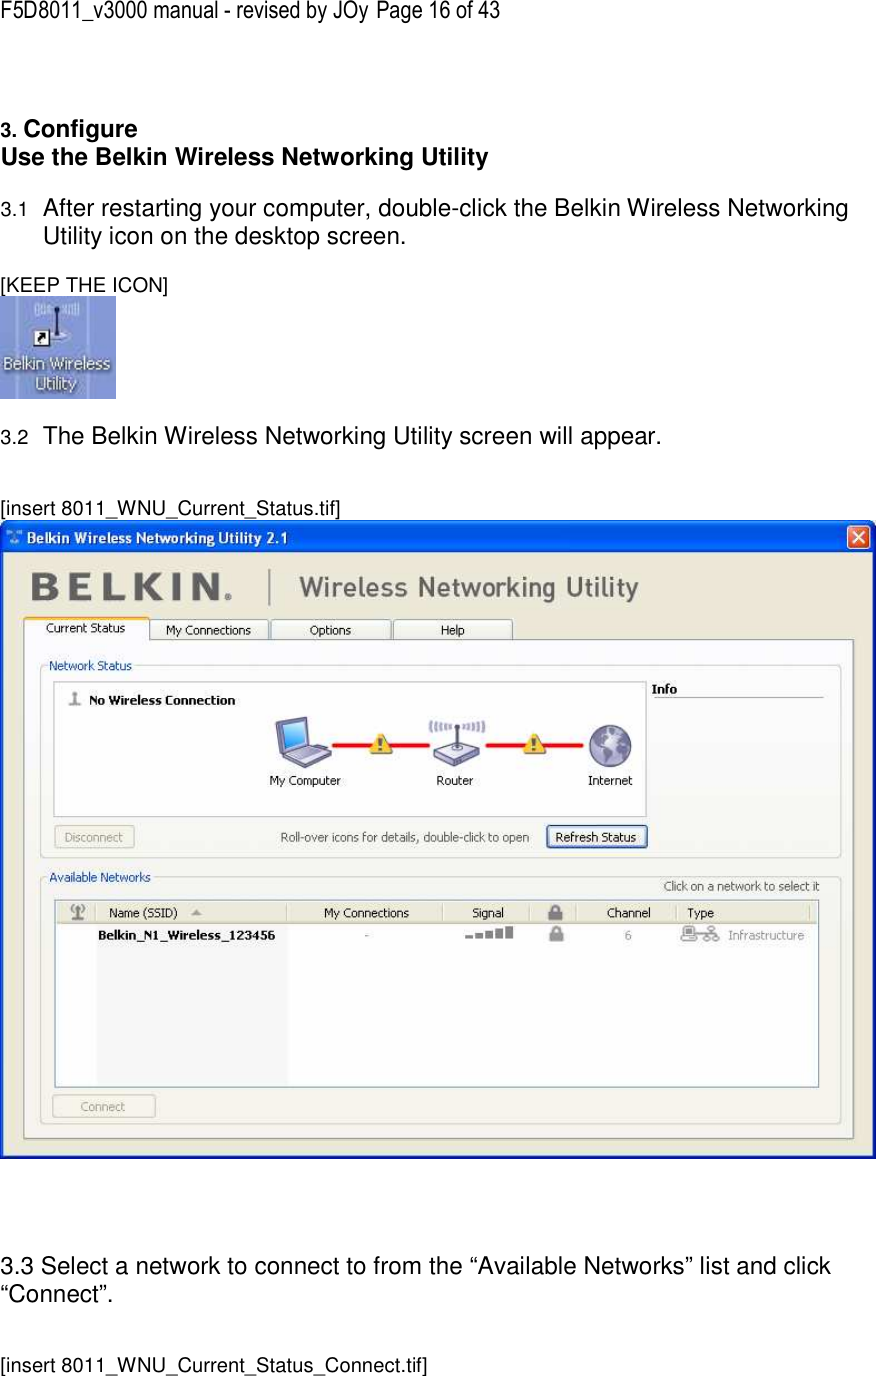 F5D8011_v3000 manual - revised by JOy Page 16 of 43   3. Configure  Use the Belkin Wireless Networking Utility   3.1 After restarting your computer, double-click the Belkin Wireless Networking Utility icon on the desktop screen.  [KEEP THE ICON]   3.2 The Belkin Wireless Networking Utility screen will appear.   [insert 8011_WNU_Current_Status.tif]      3.3 Select a network to connect to from the “Available Networks” list and click “Connect”.   [insert 8011_WNU_Current_Status_Connect.tif] 